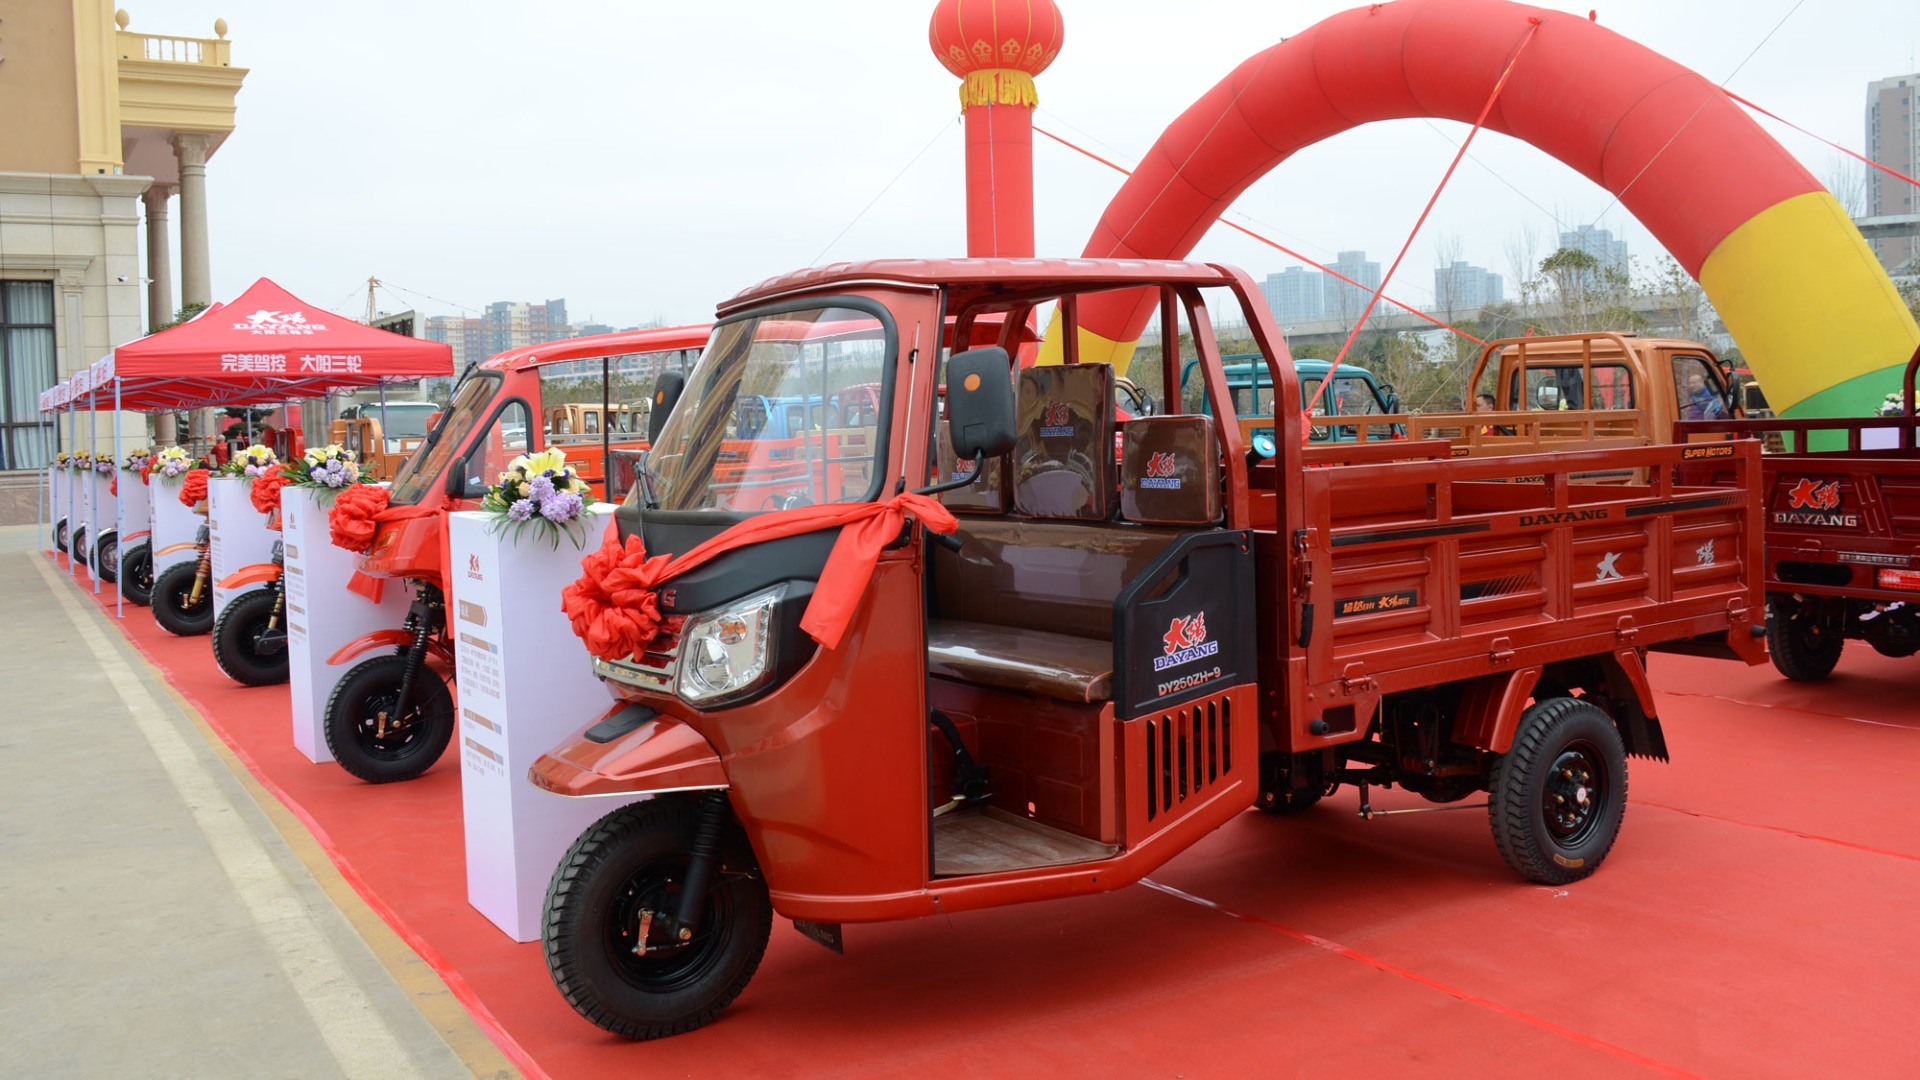 Tricycle of home show